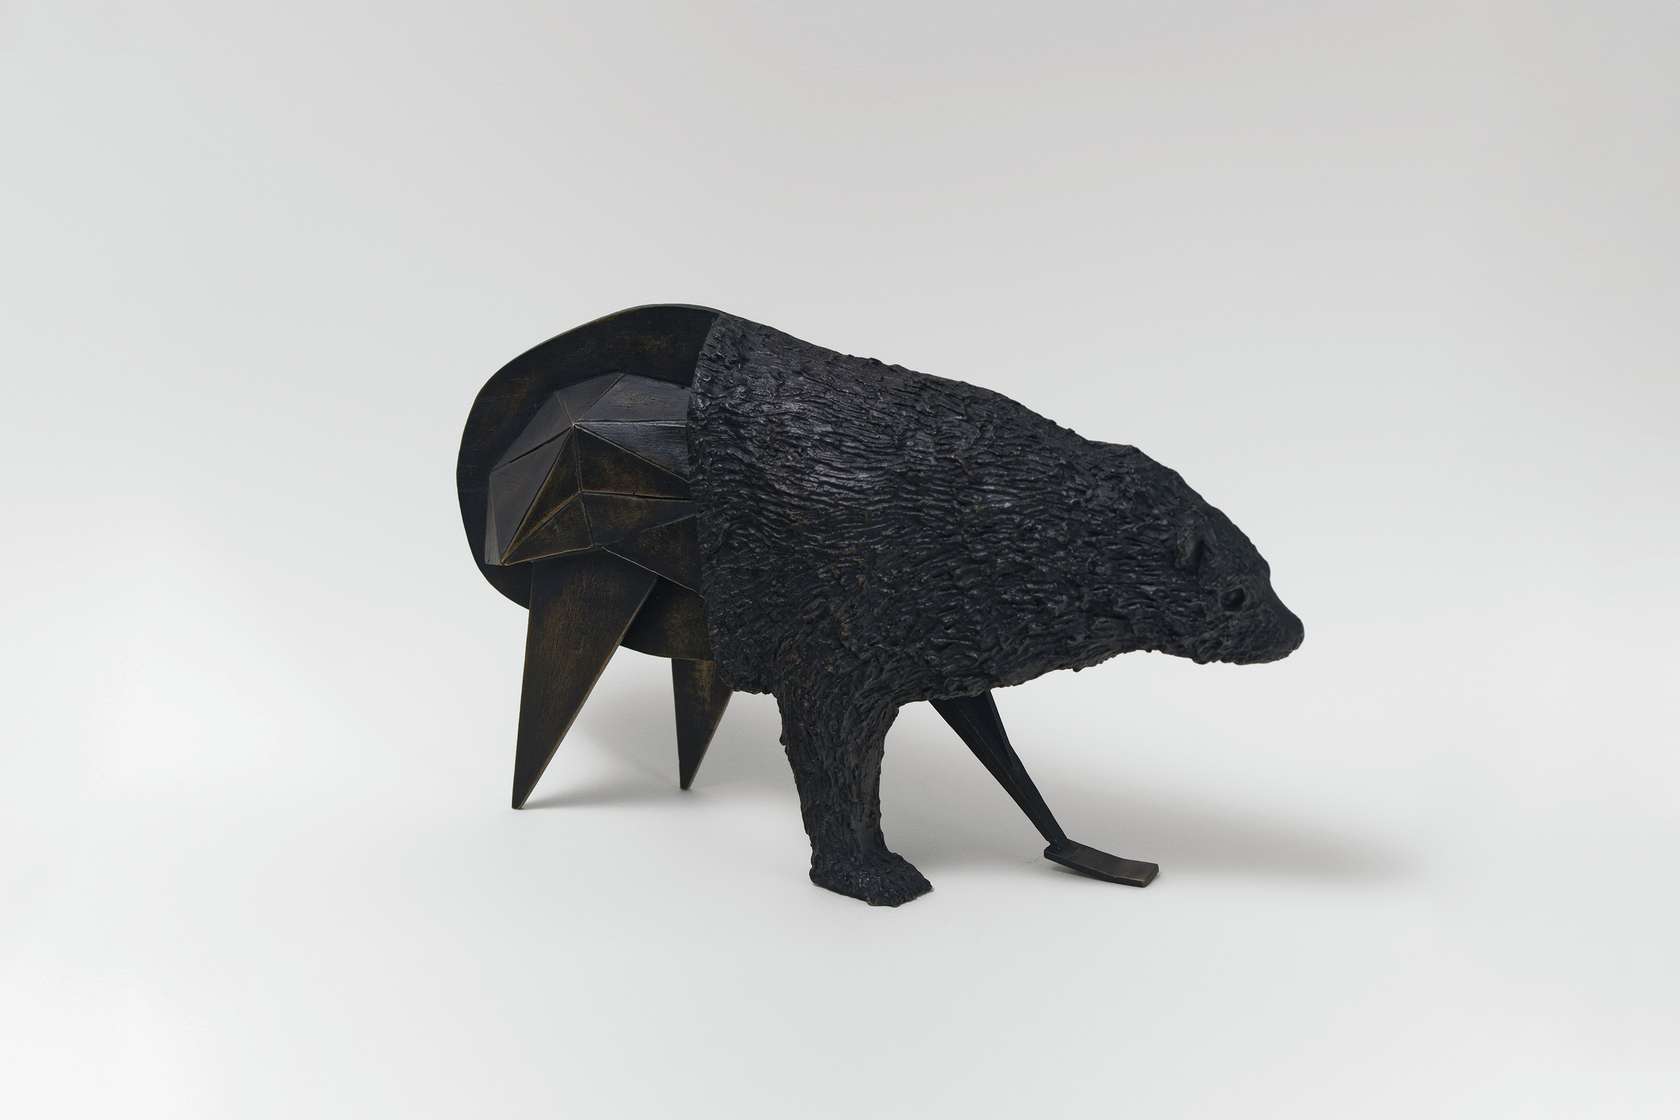 Abraham Poincheval, Ours, 2020 Bronze18 × 31 × 6 cm / 7 1/8 × 12 2/8 × 2 3/8 in.